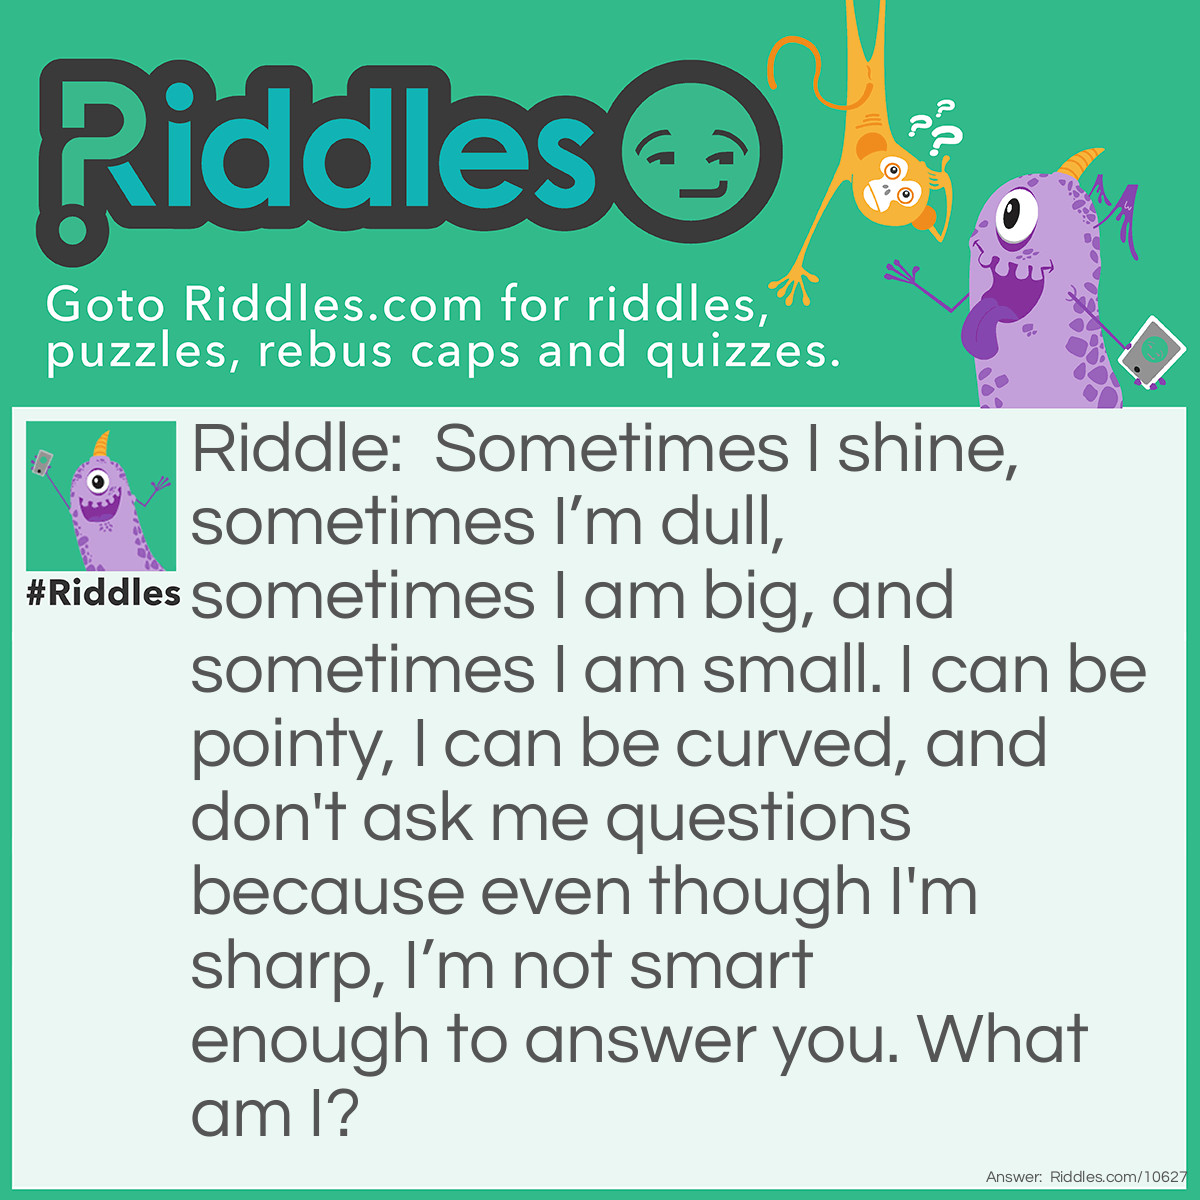 Riddle: Sometimes I shine, sometimes I’m dull, sometimes I am big, and sometimes I am small. I can be pointy, I can be curved, and don't ask me questions because even though I'm sharp, I’m not smart enough to answer you. What am I? Answer: A knife.